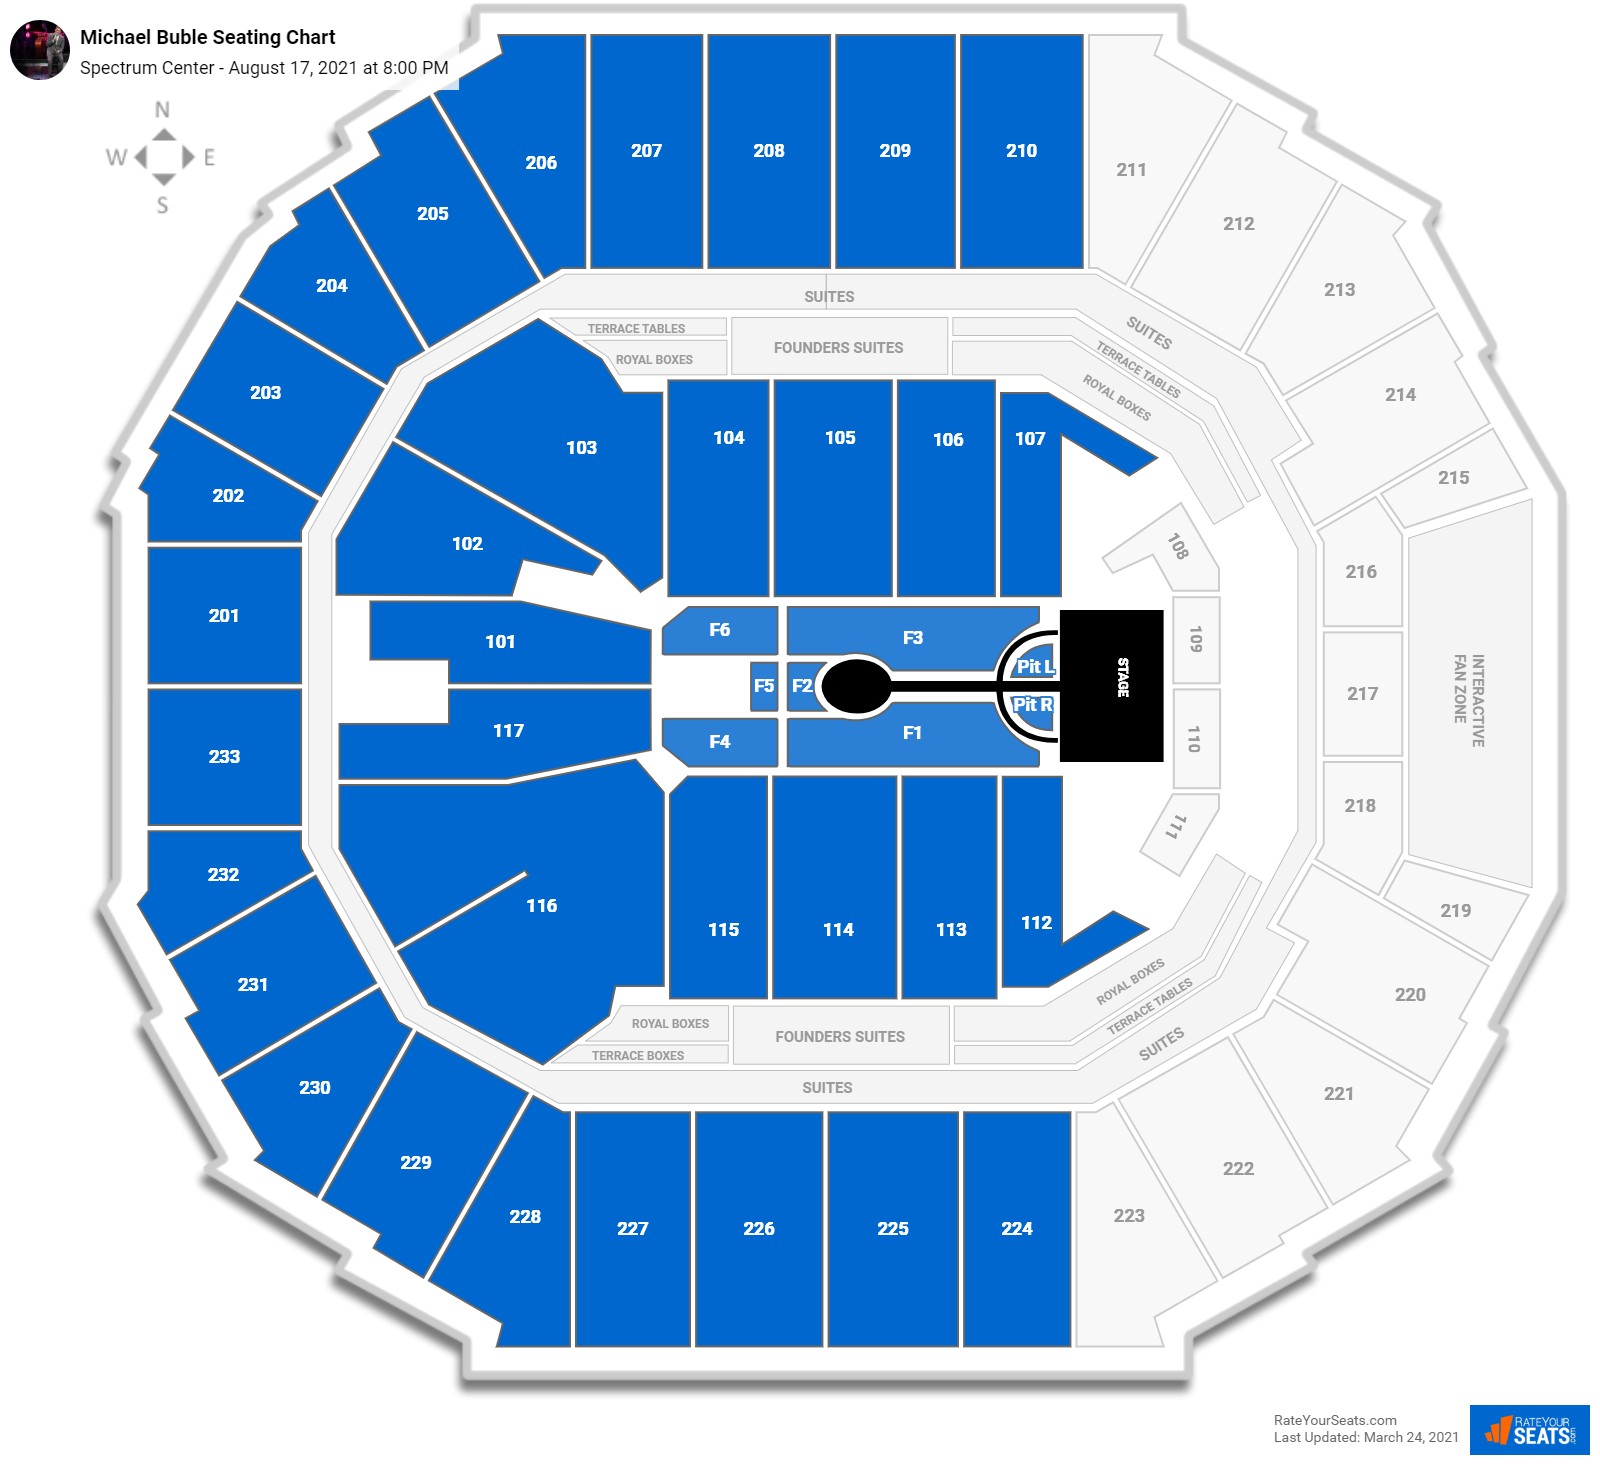 Spectrum Center Seating Charts for Concerts